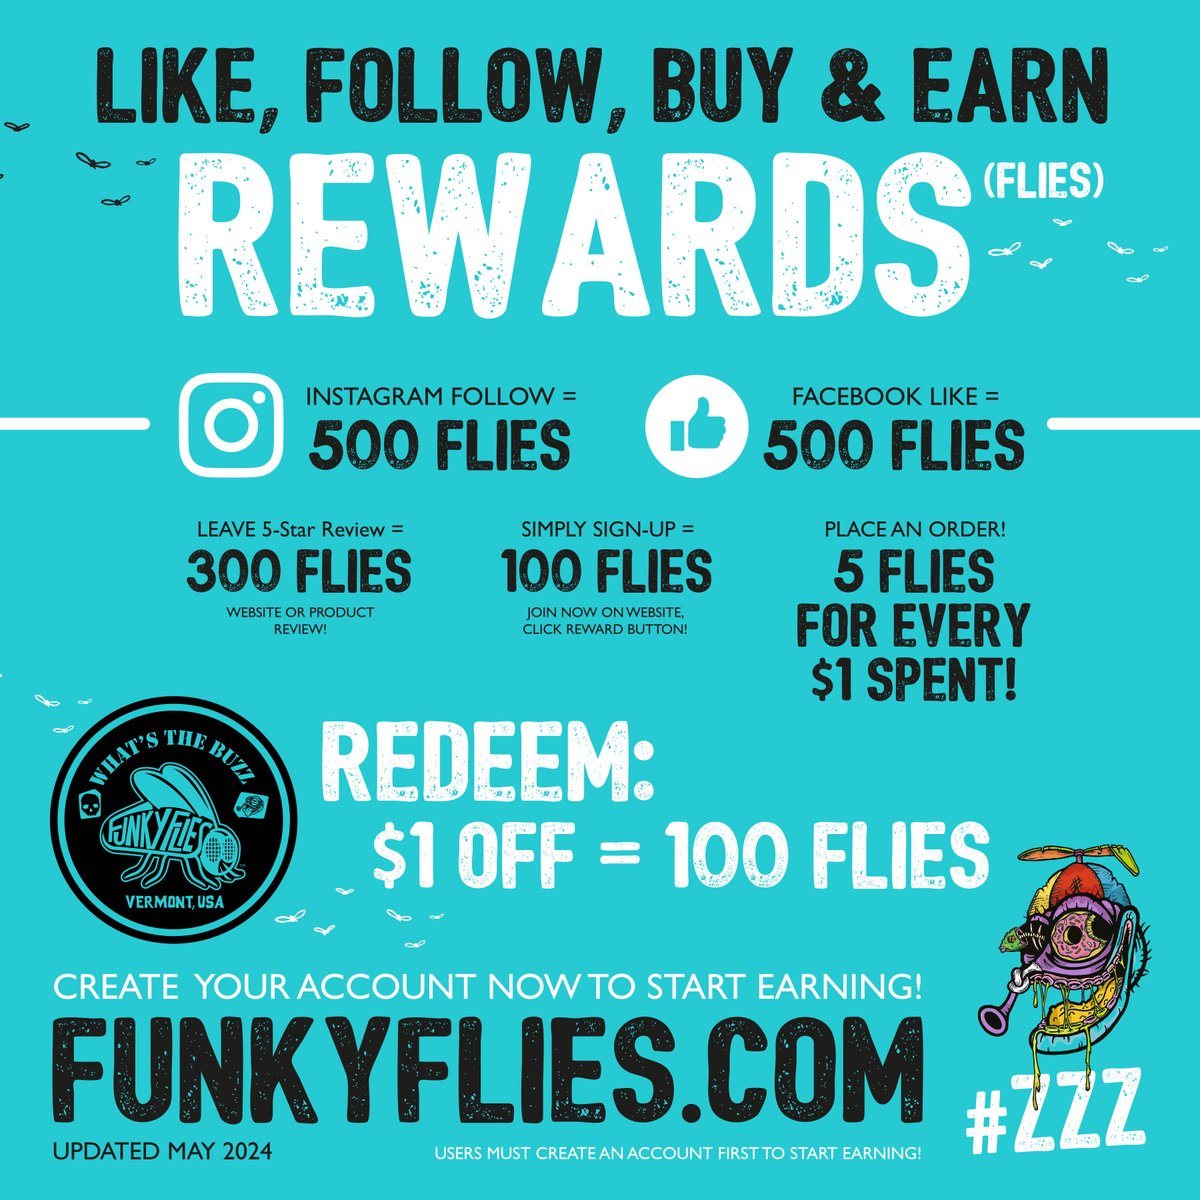 🎉 Introducing the Funky Flies Reward Program! 🎉 Hey Funky Flies Fam! We're thrilled to launch our brand new website Reward Program, designed just for YOU! 🚀 Ways to Earn FLIES: 1️⃣ Follow us on Instagram 2️⃣ Like us on Facebook 3️⃣ Leave a review on our website 4️⃣ Make a